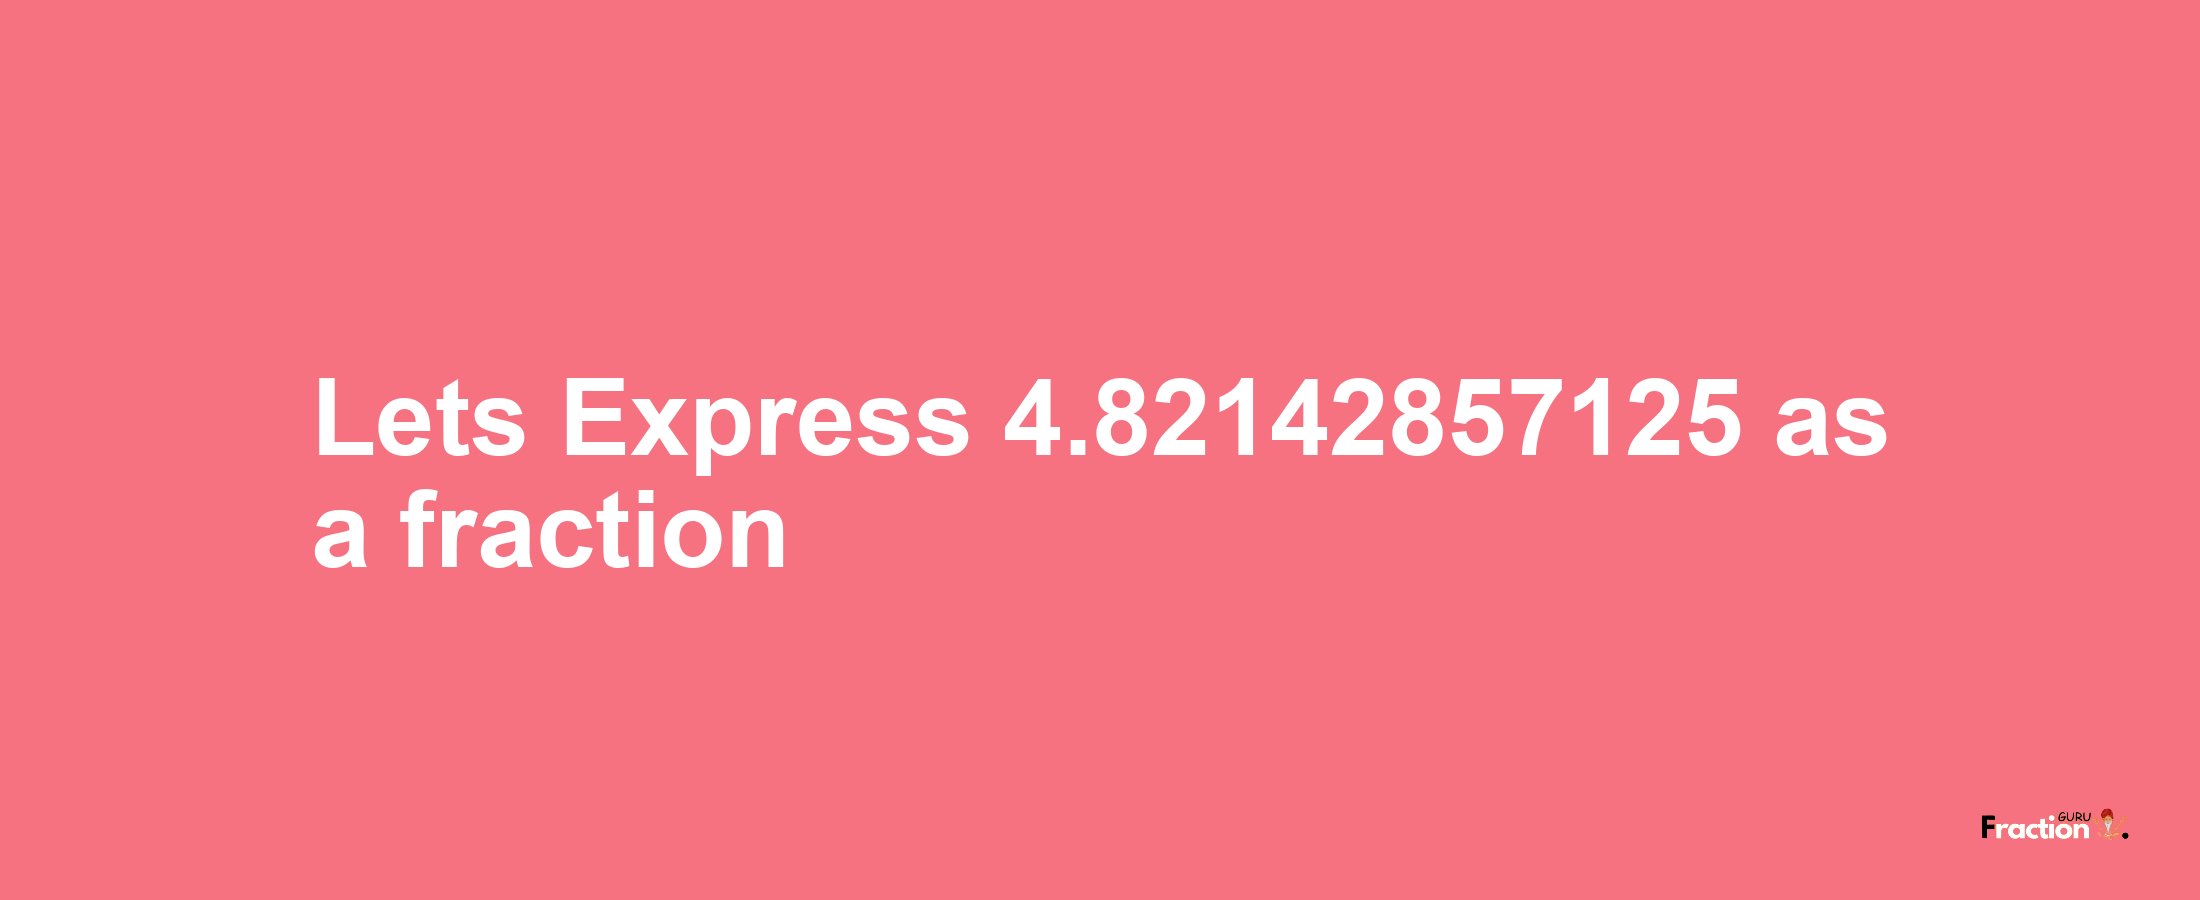 Lets Express 4.82142857125 as afraction